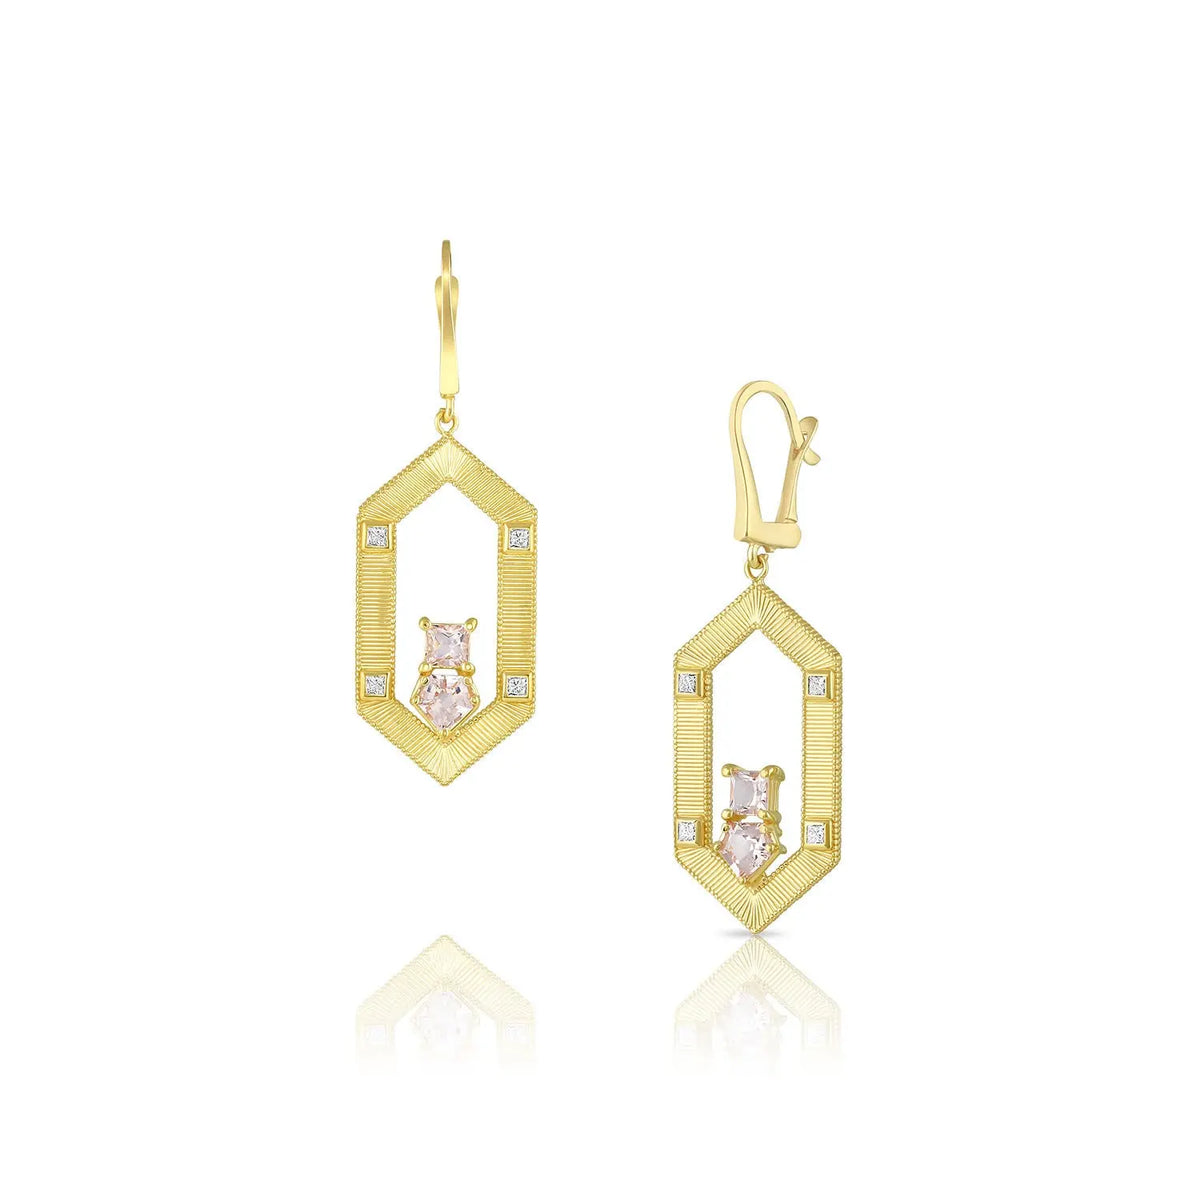 Custom cut morganite stones stack neatly together in the bottom of this diamond embellished hexagon.  Texture gold covers both the front and back for a beautiful 360 degree view.  Set in 18k yellow gold, these earrings are perfect for day and night.